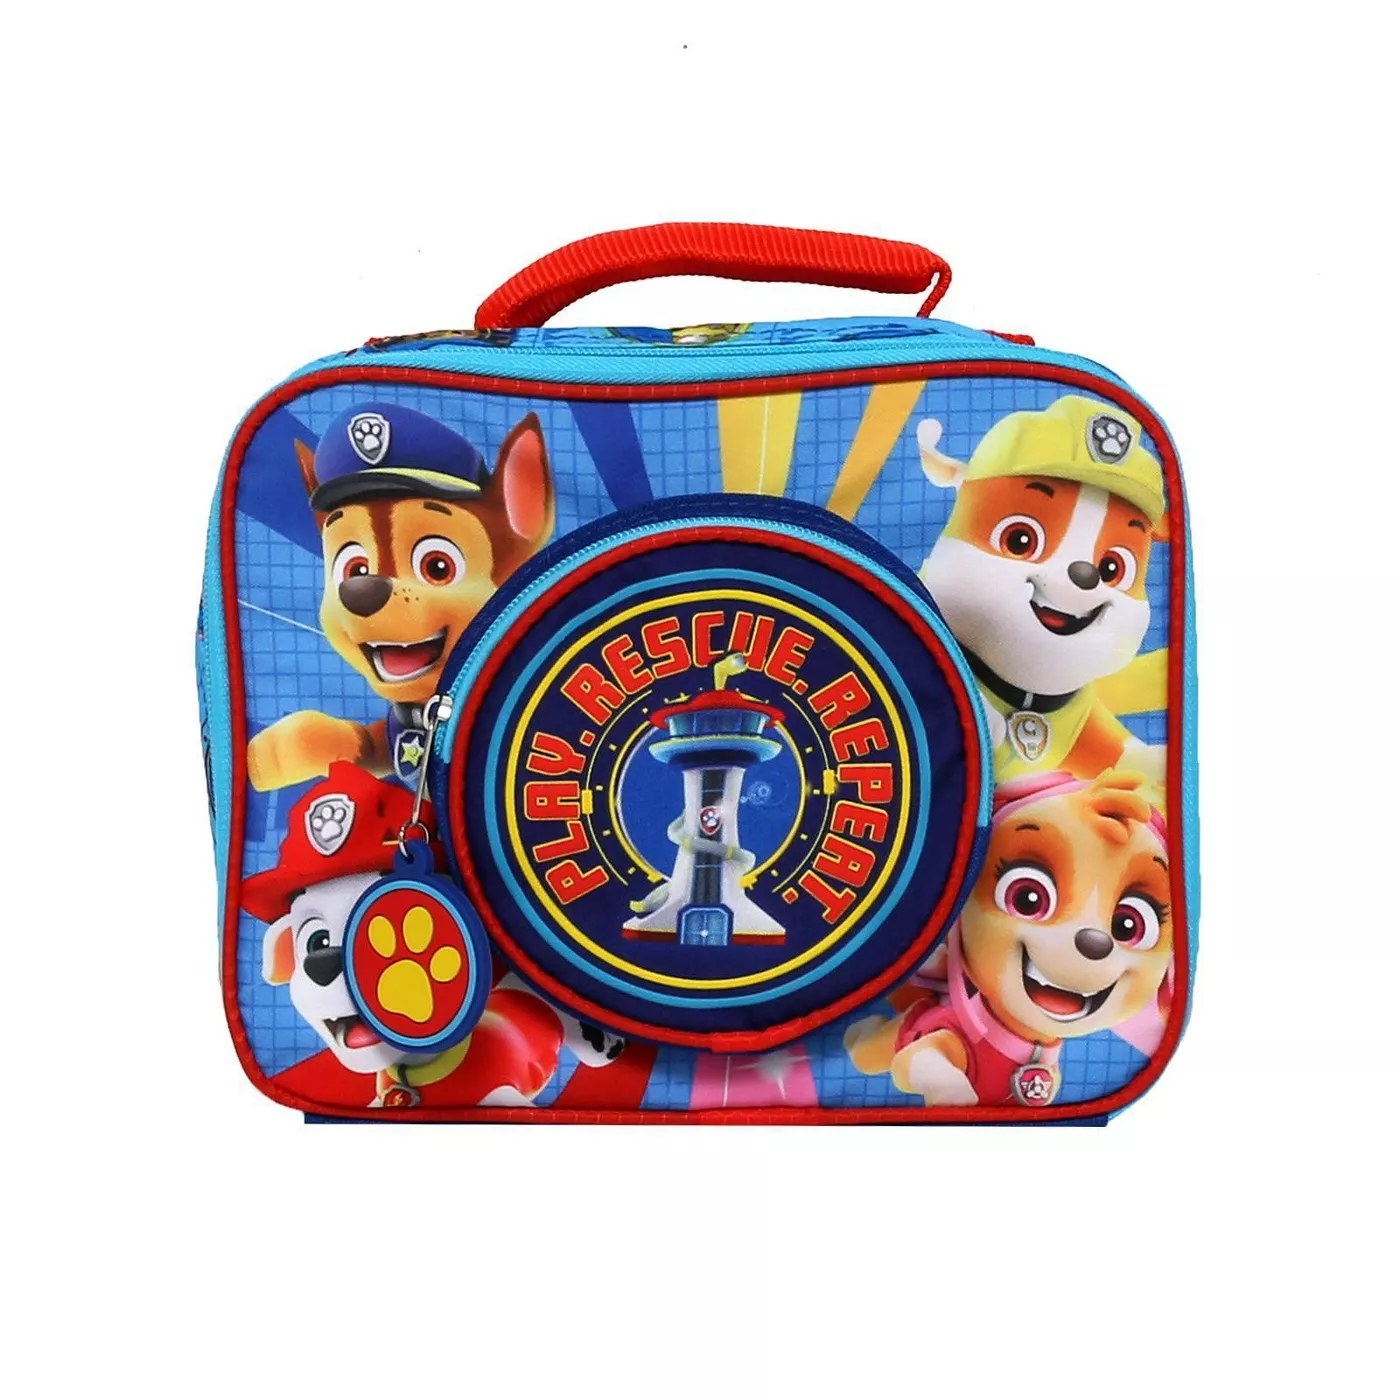 The PAW Patrol Play Rescue Repeat lunch tote